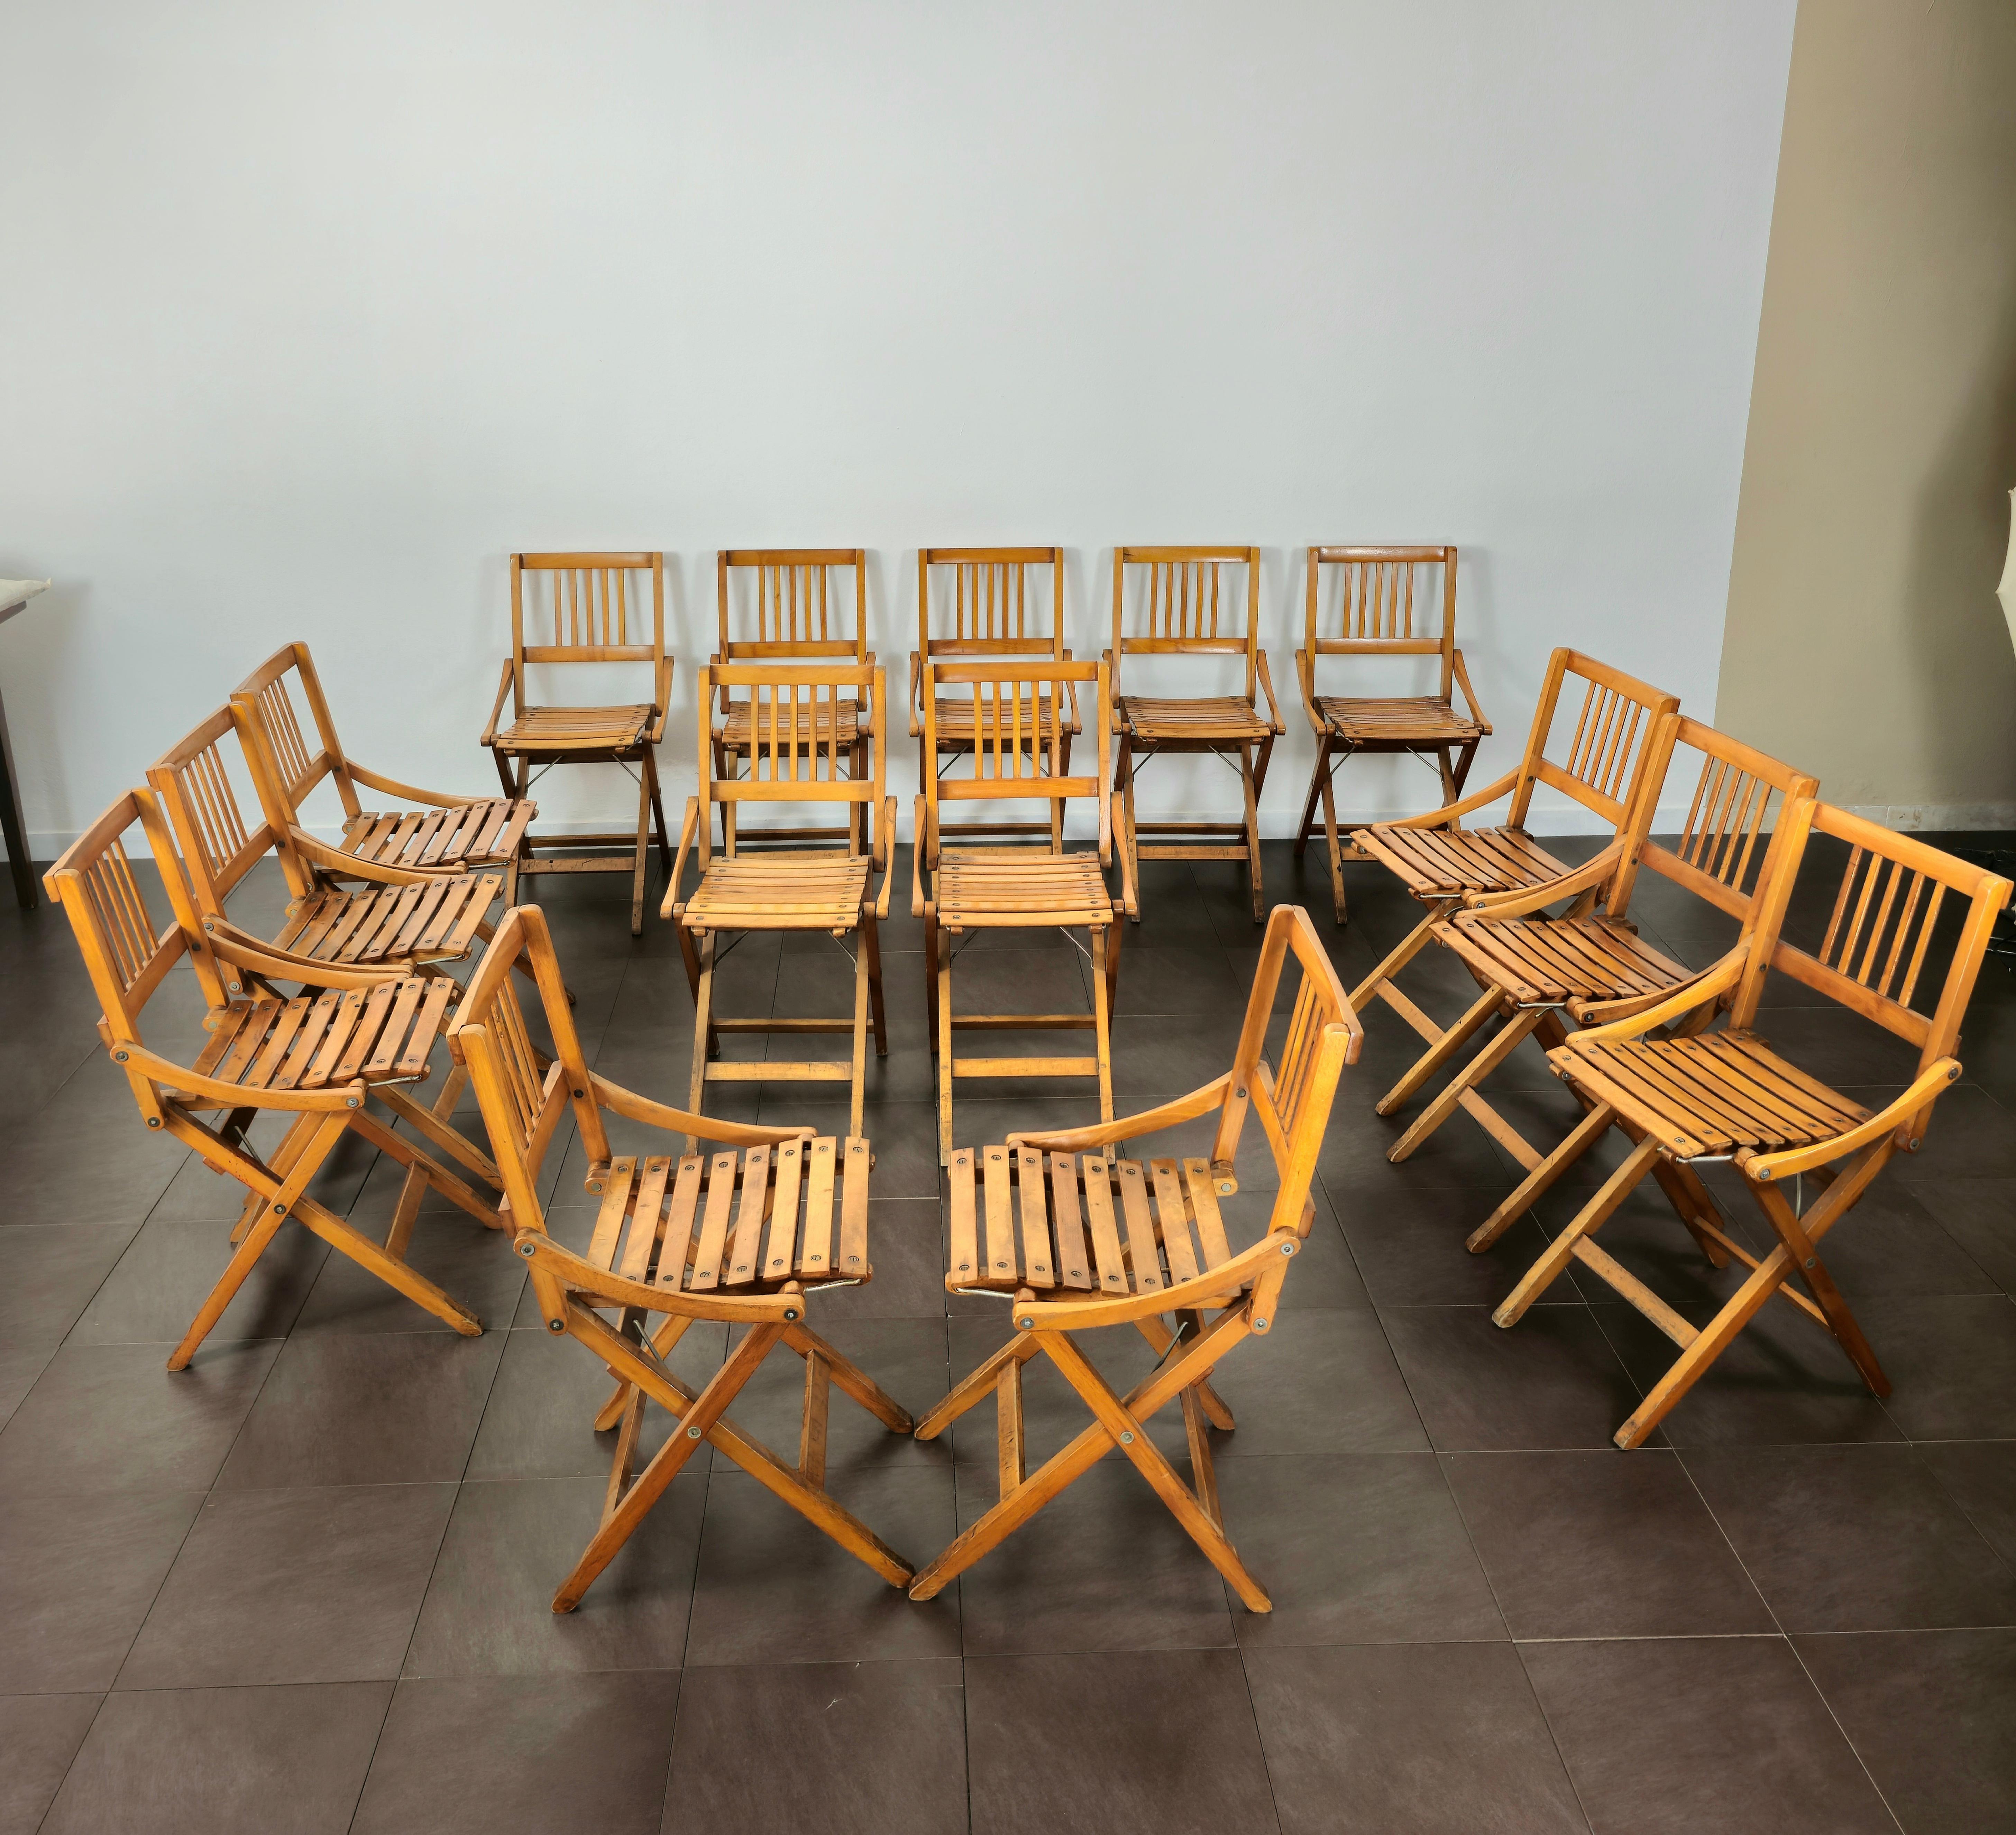 Rare set of 15 folding wooden chairs not to be confused with the small ones for children, produced in Italy in the 1950s / 60s by the Fratelli Reguitti. The chairs can also be placed for outdoor environments.